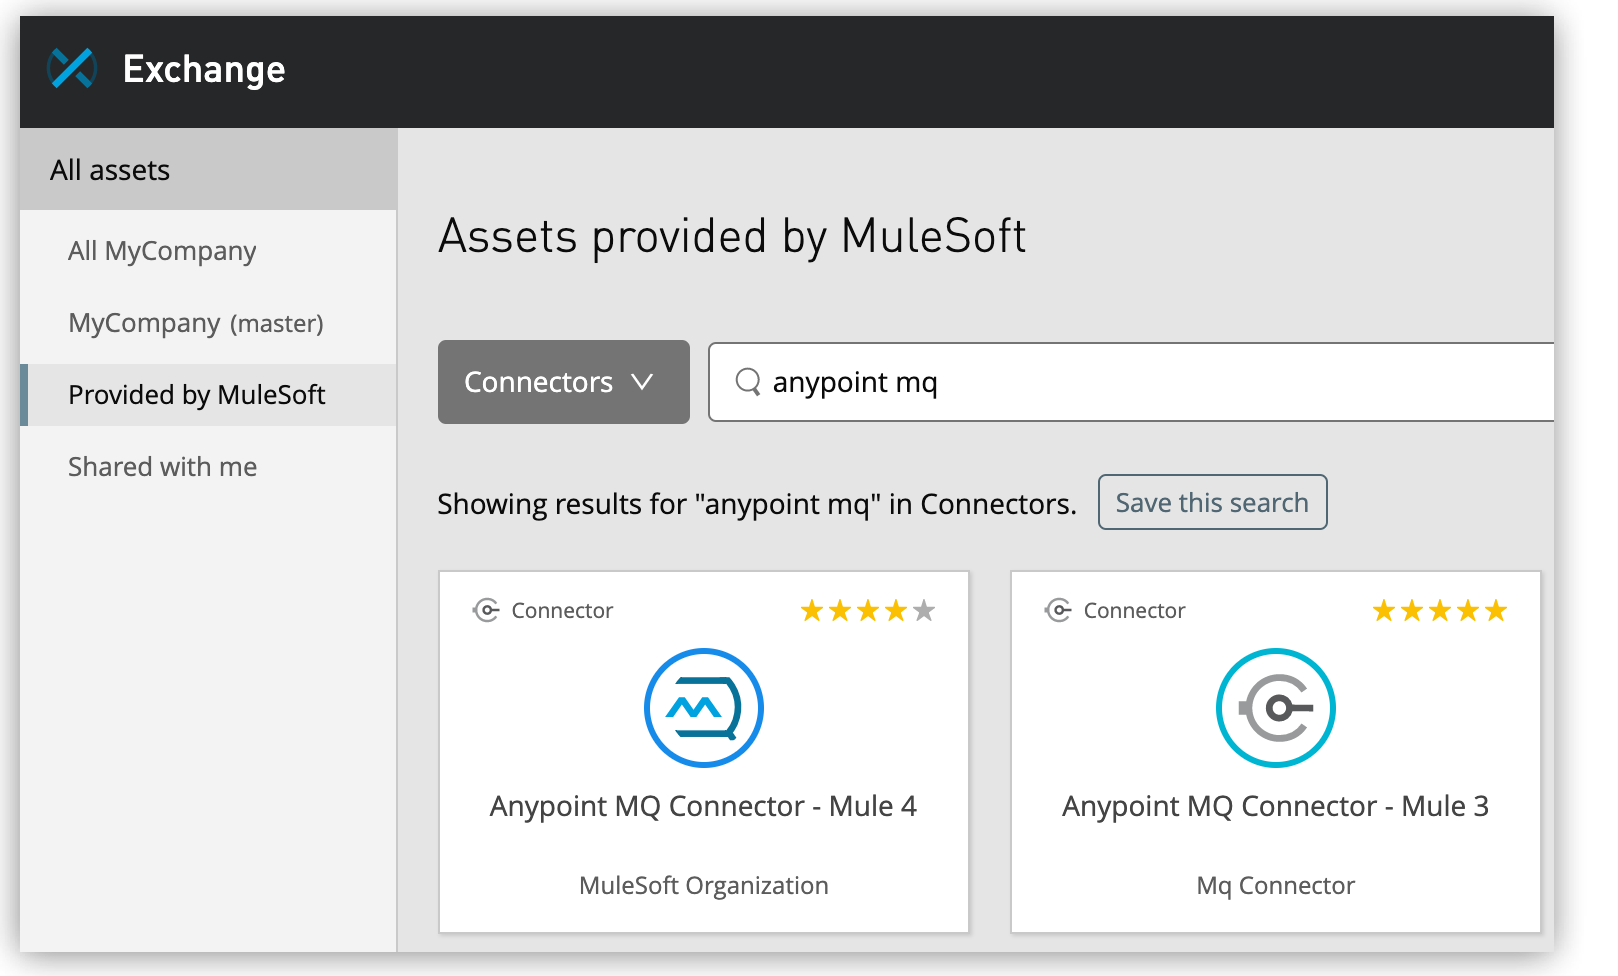 Provided by MuleSoft menu, Connectors drop-down menu, and search field in Exchange